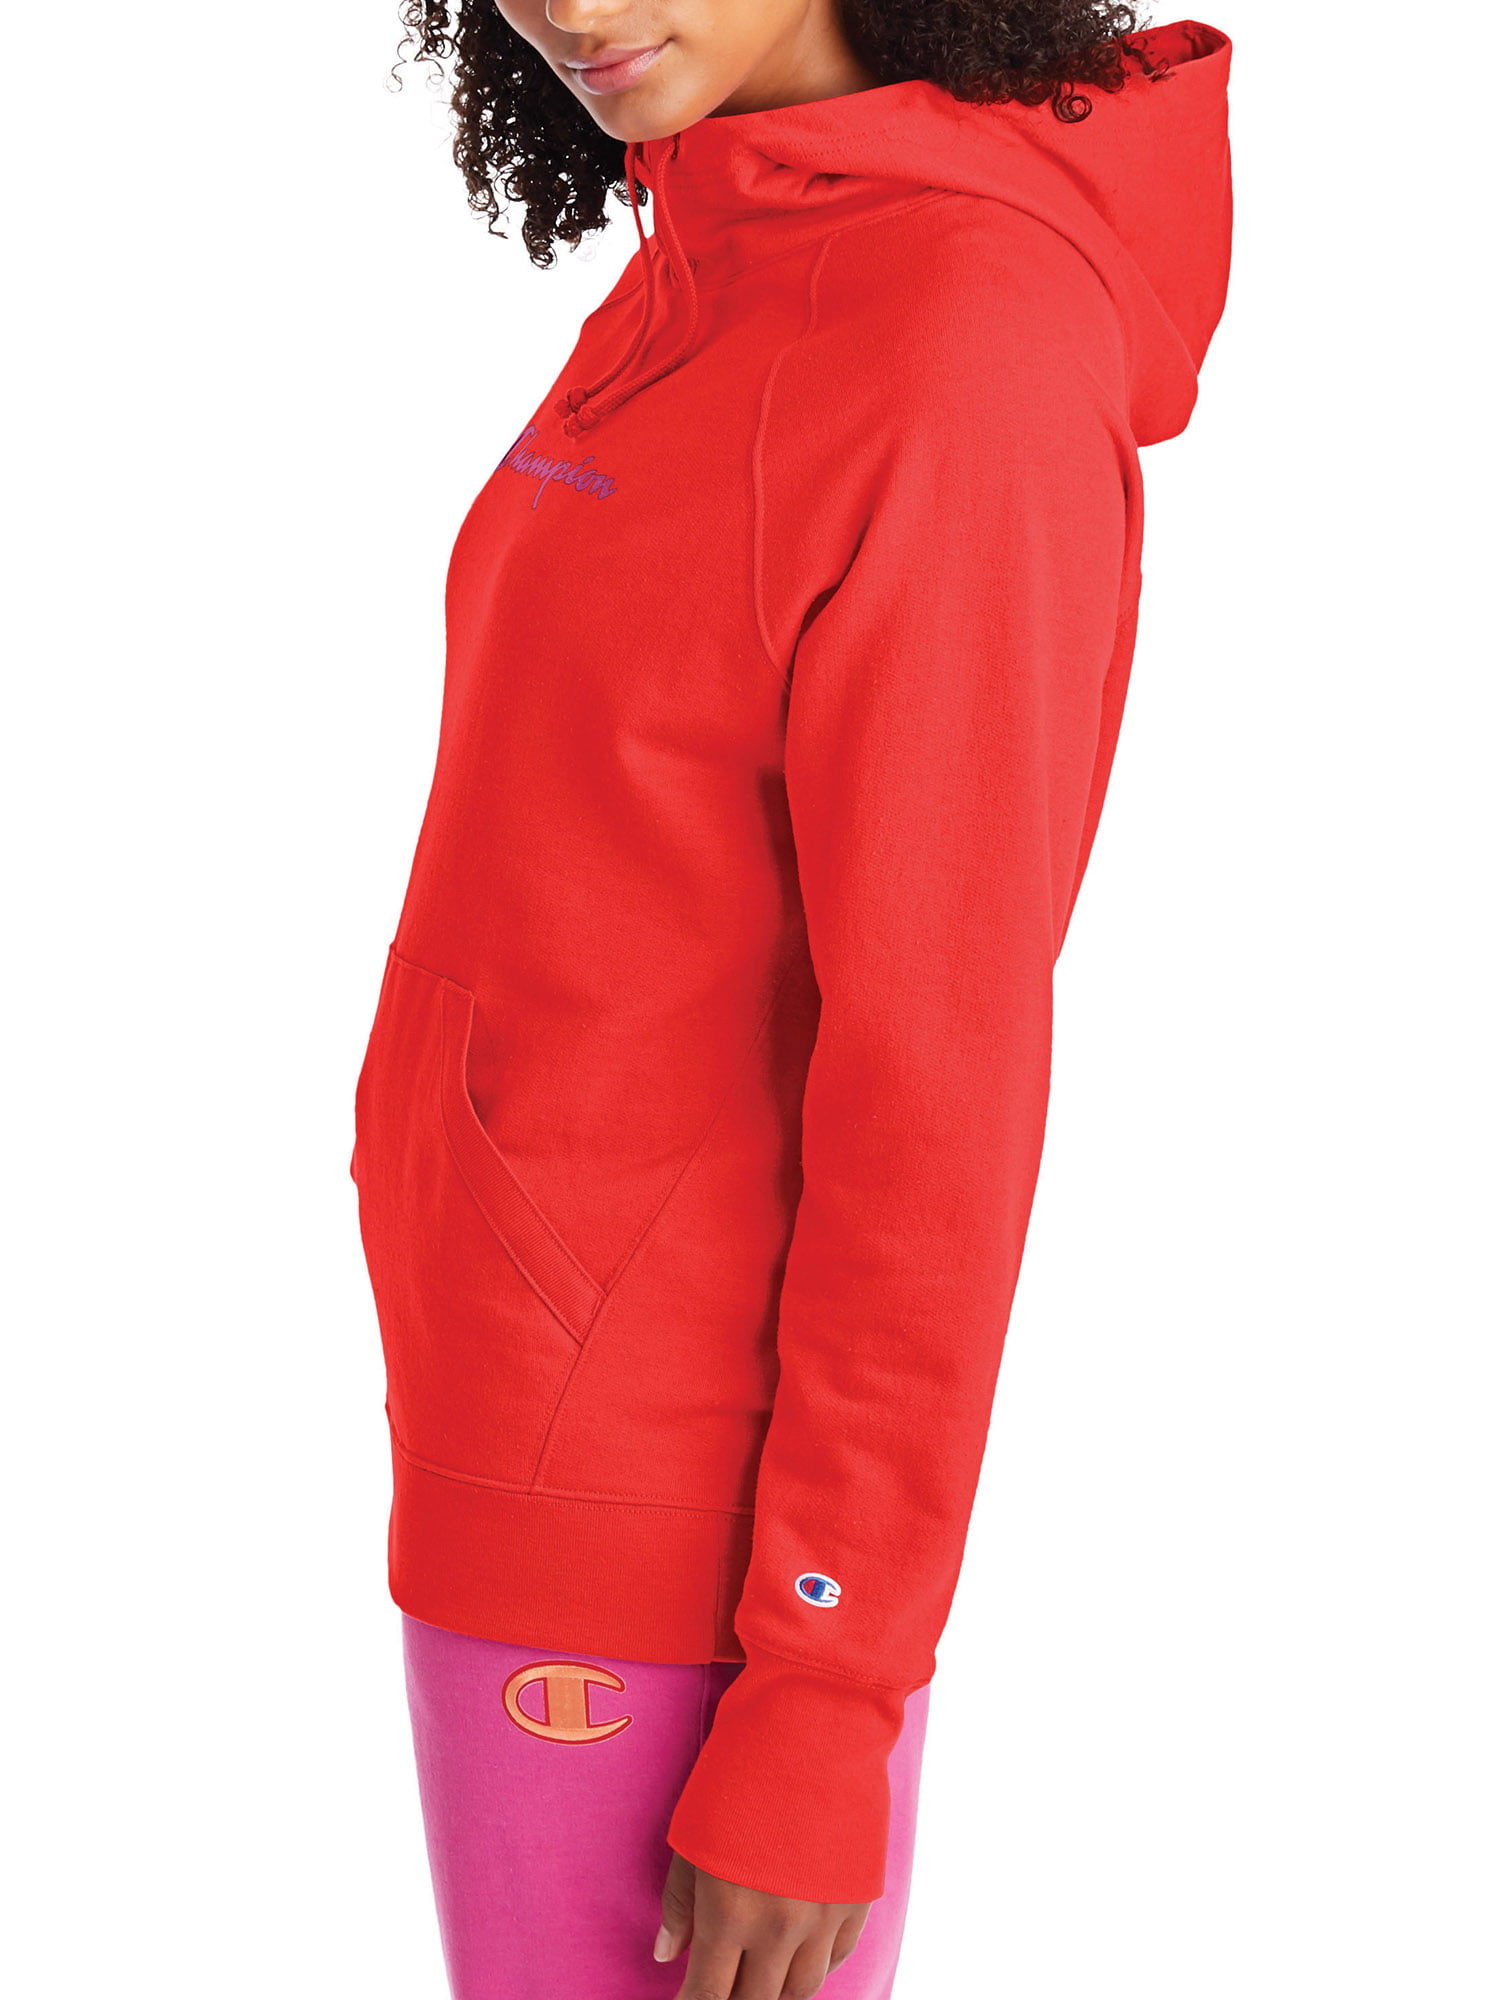 CHAMPION REVERSE WEAVE HOODED FULL ZIP TOP 111248 RS017 RED FELPA DONNA